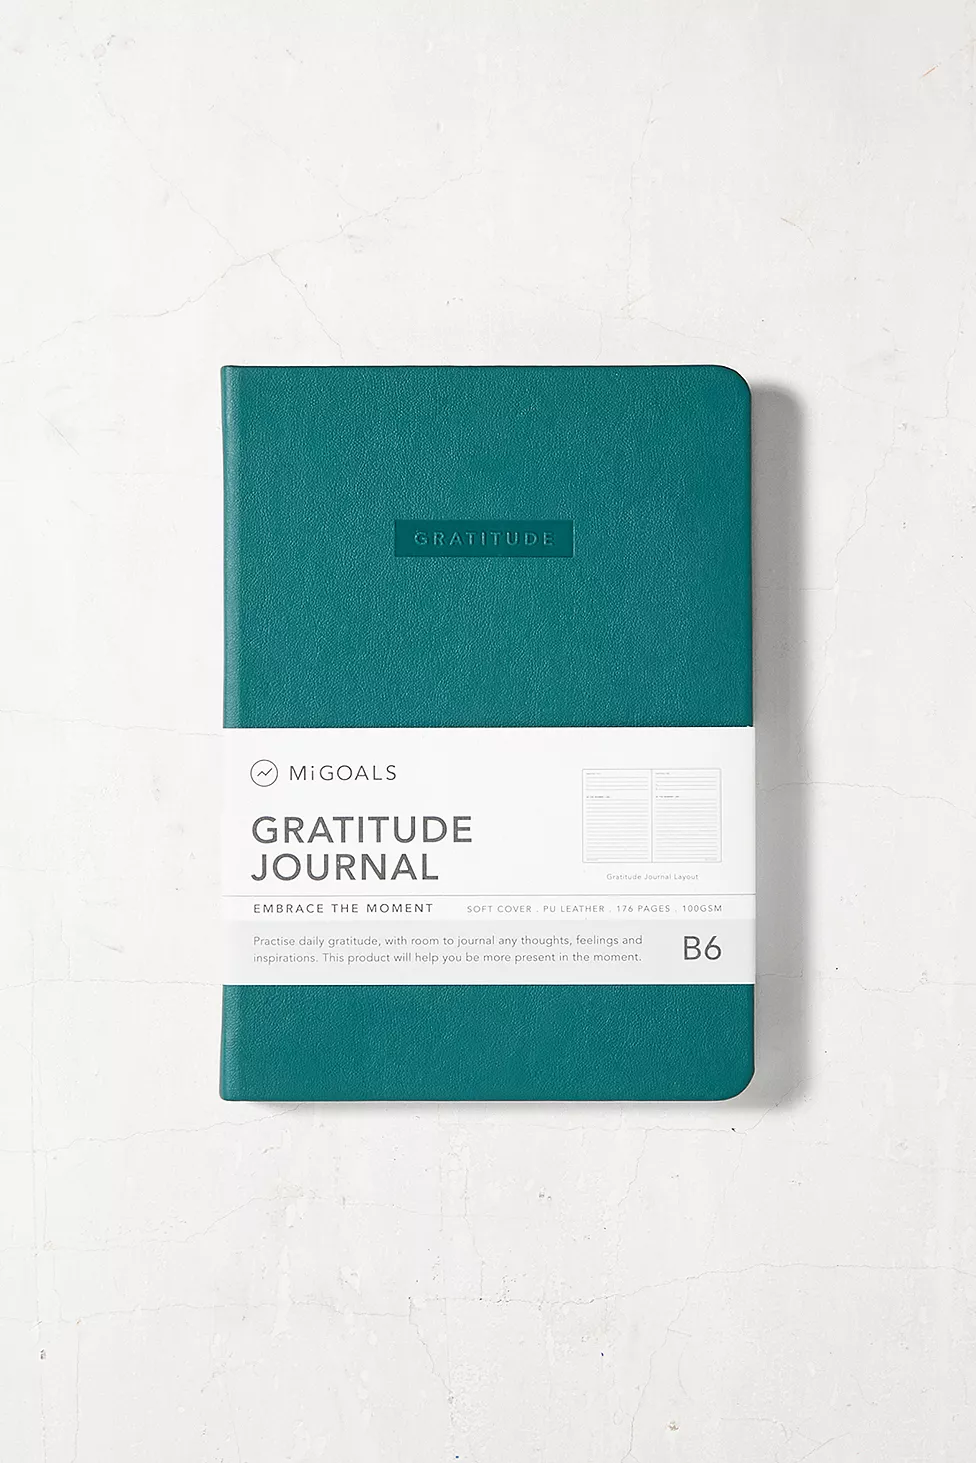 Chic Secret Santa Gift Ideas for every budget in 2023. Start feeling more grateful with this daily journal by MiGoals. The embossed PU journal includes FSC Certified paper inside with gratitude exercises and worksheets to bring better wellness into your day-to-day.